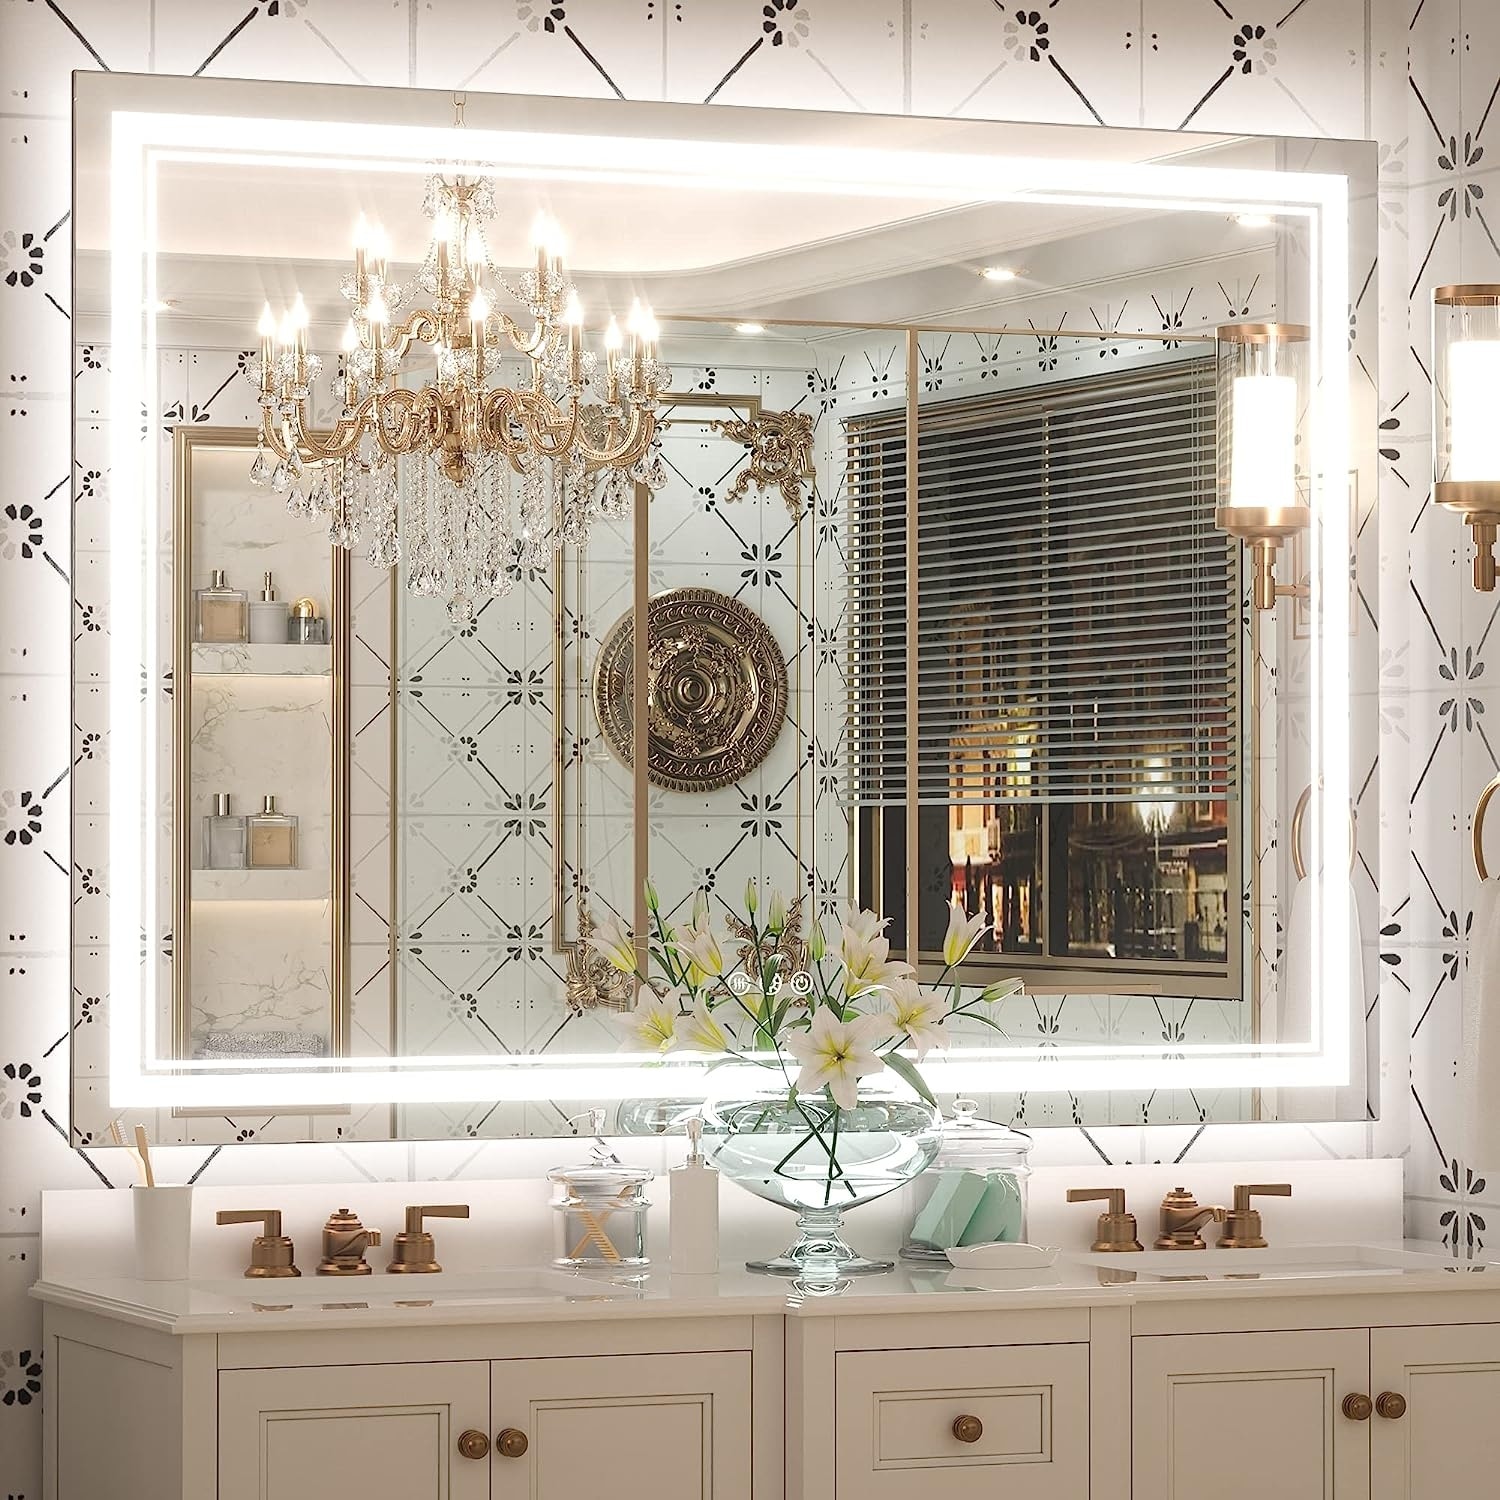 https://ak1.ostkcdn.com/images/products/is/images/direct/d63e0f9567f5669b6f995359dc0590b015583bc2/KEONJINN-LED-Bathroom-Vanity-Wall-Mirror%2C-Frontlit-and-Backlit%2C-Stepless-3-Colors-Temperature-and-Dimmable.jpg